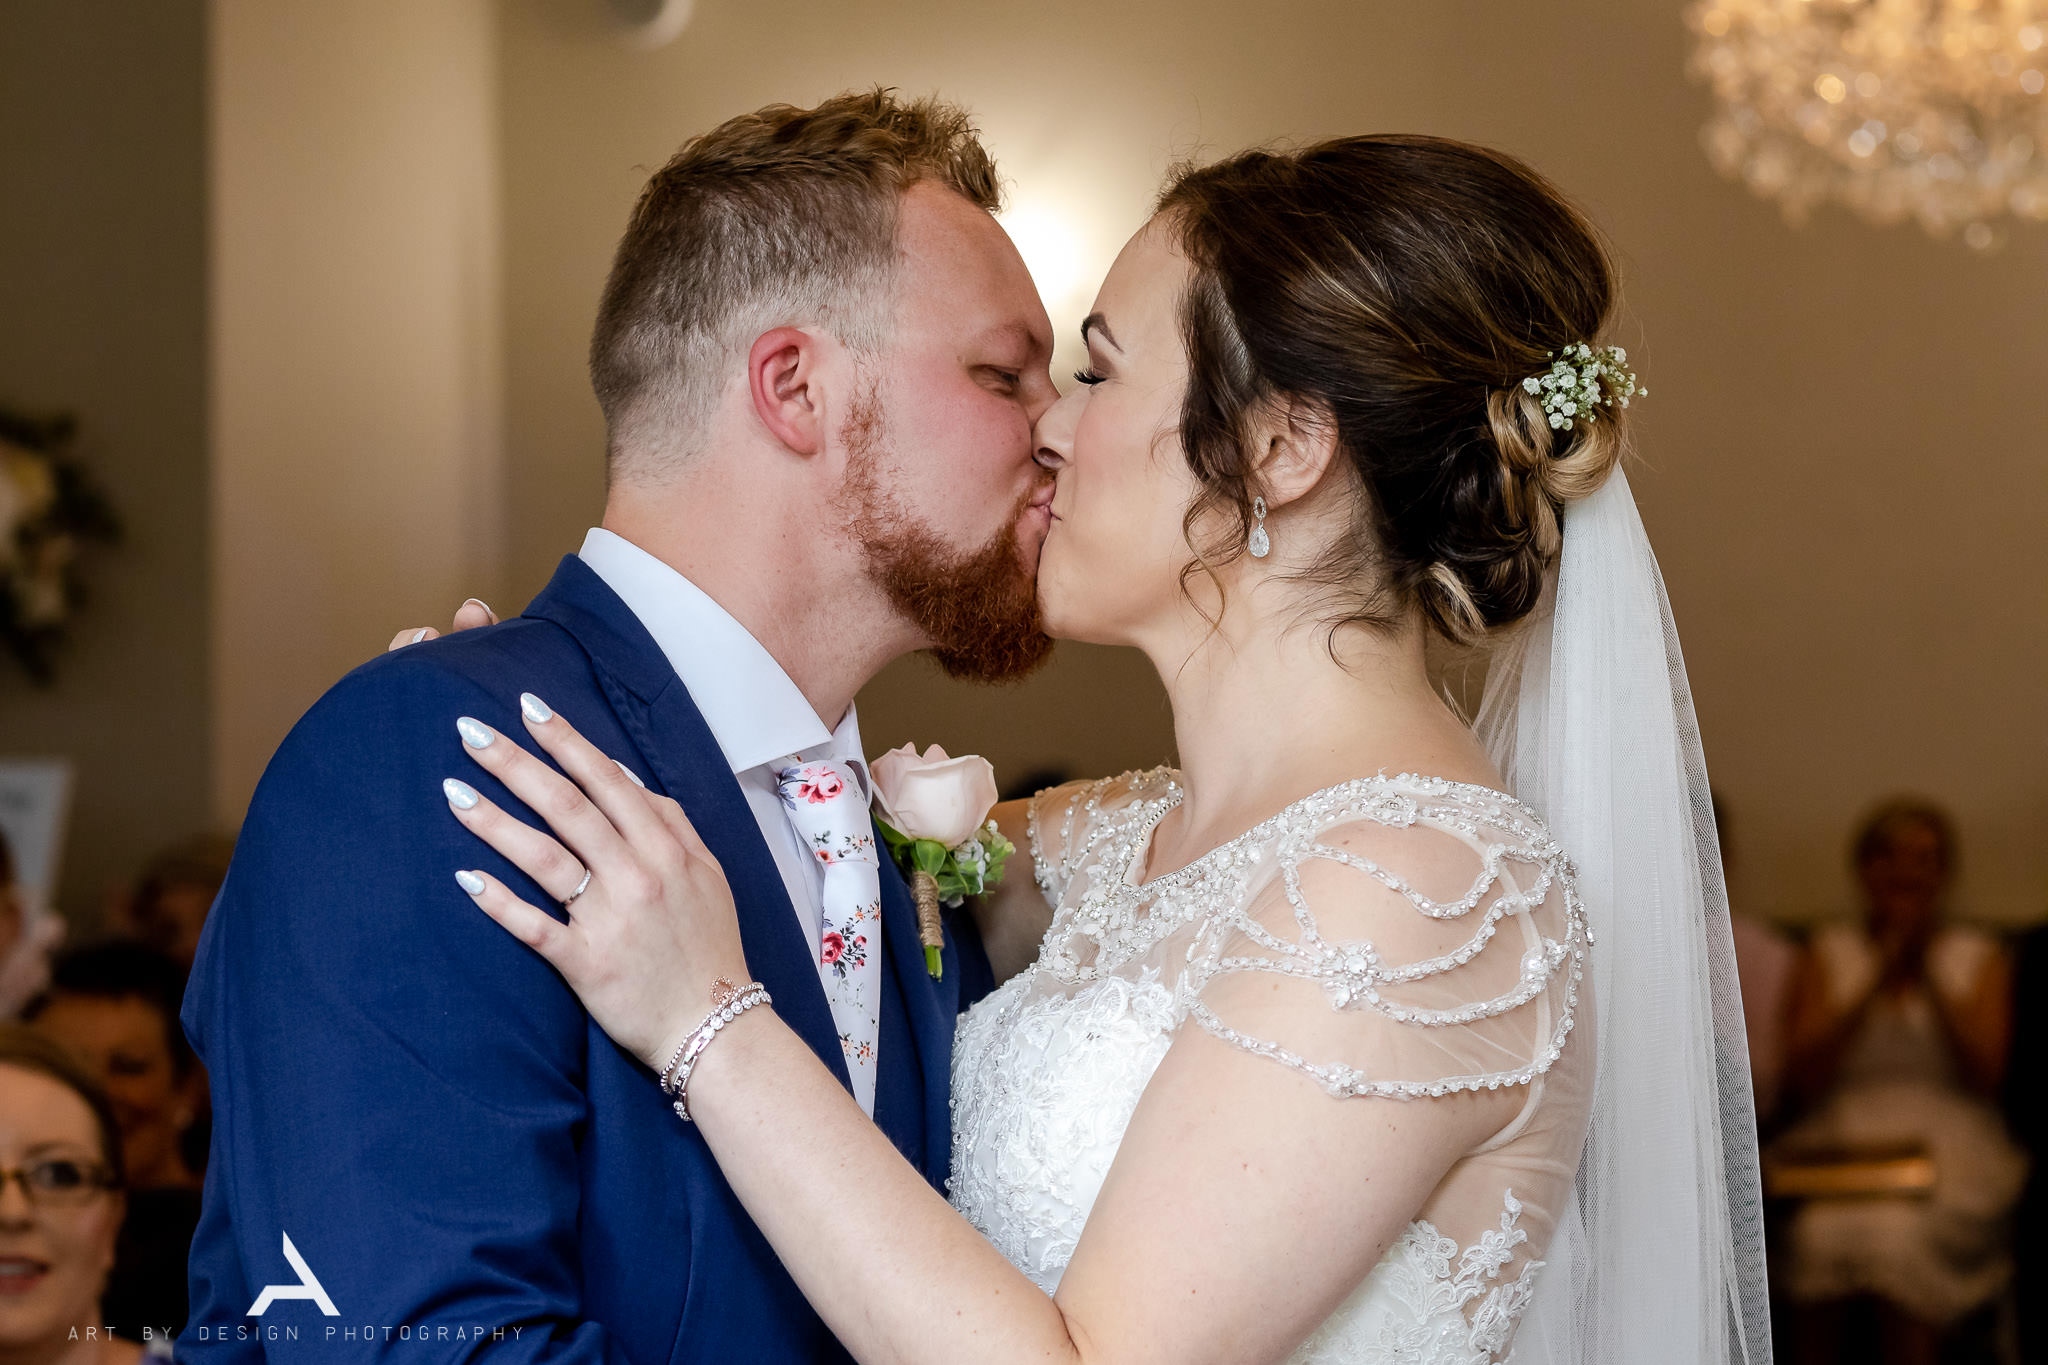 Bryngarw House wedding - First Kiss - Art by Design Photography